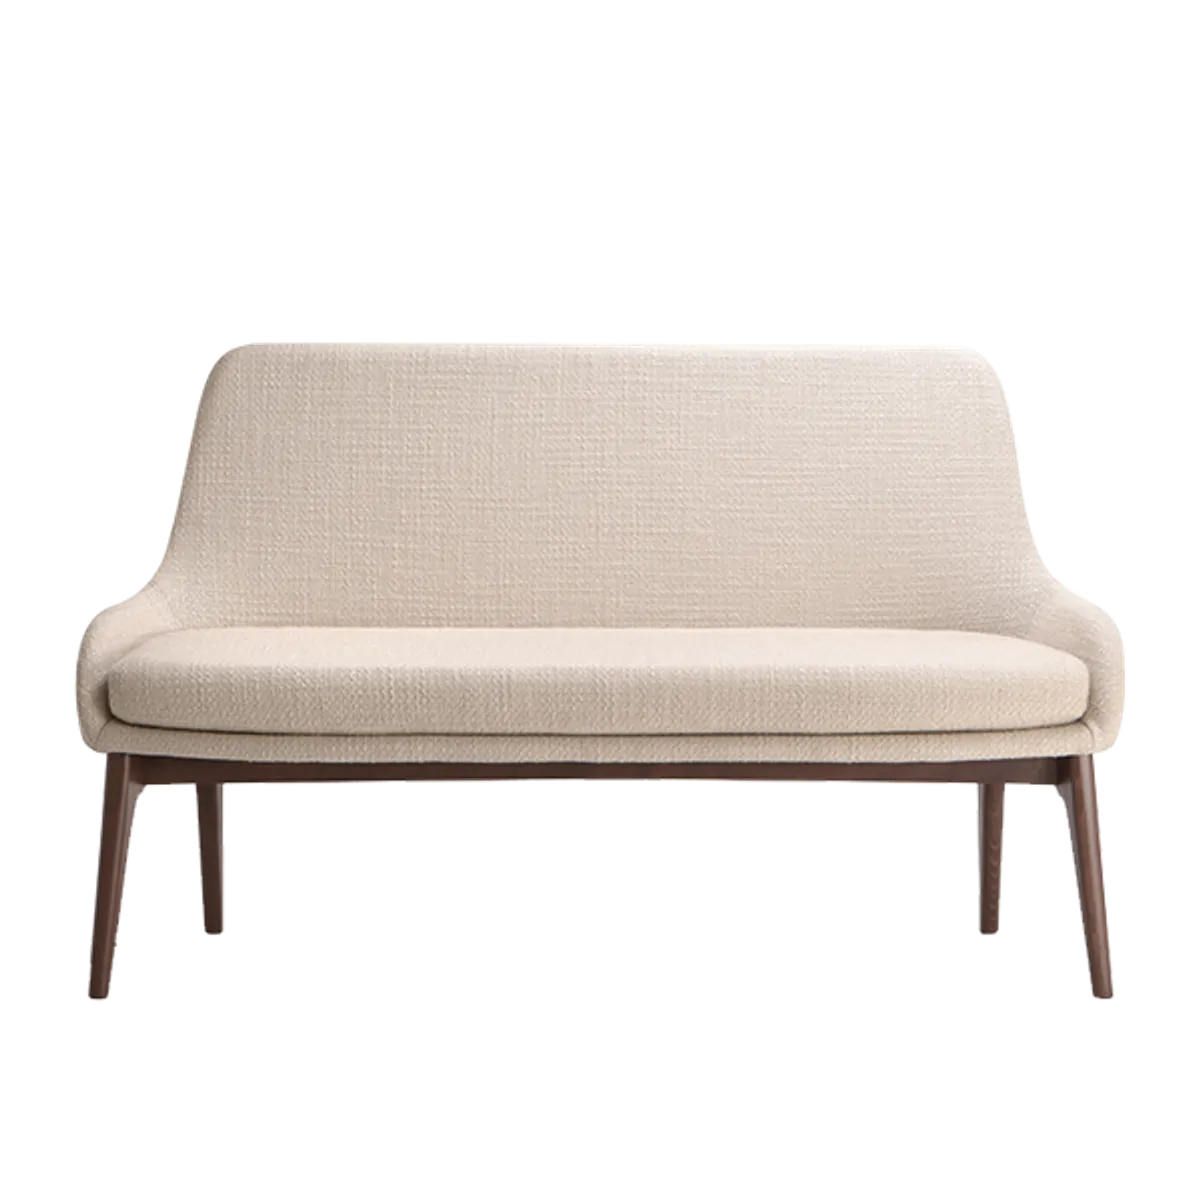 Web Josie Sofa Upholstered Hotel Furniture With Wooden Legs Insideoutcontracts